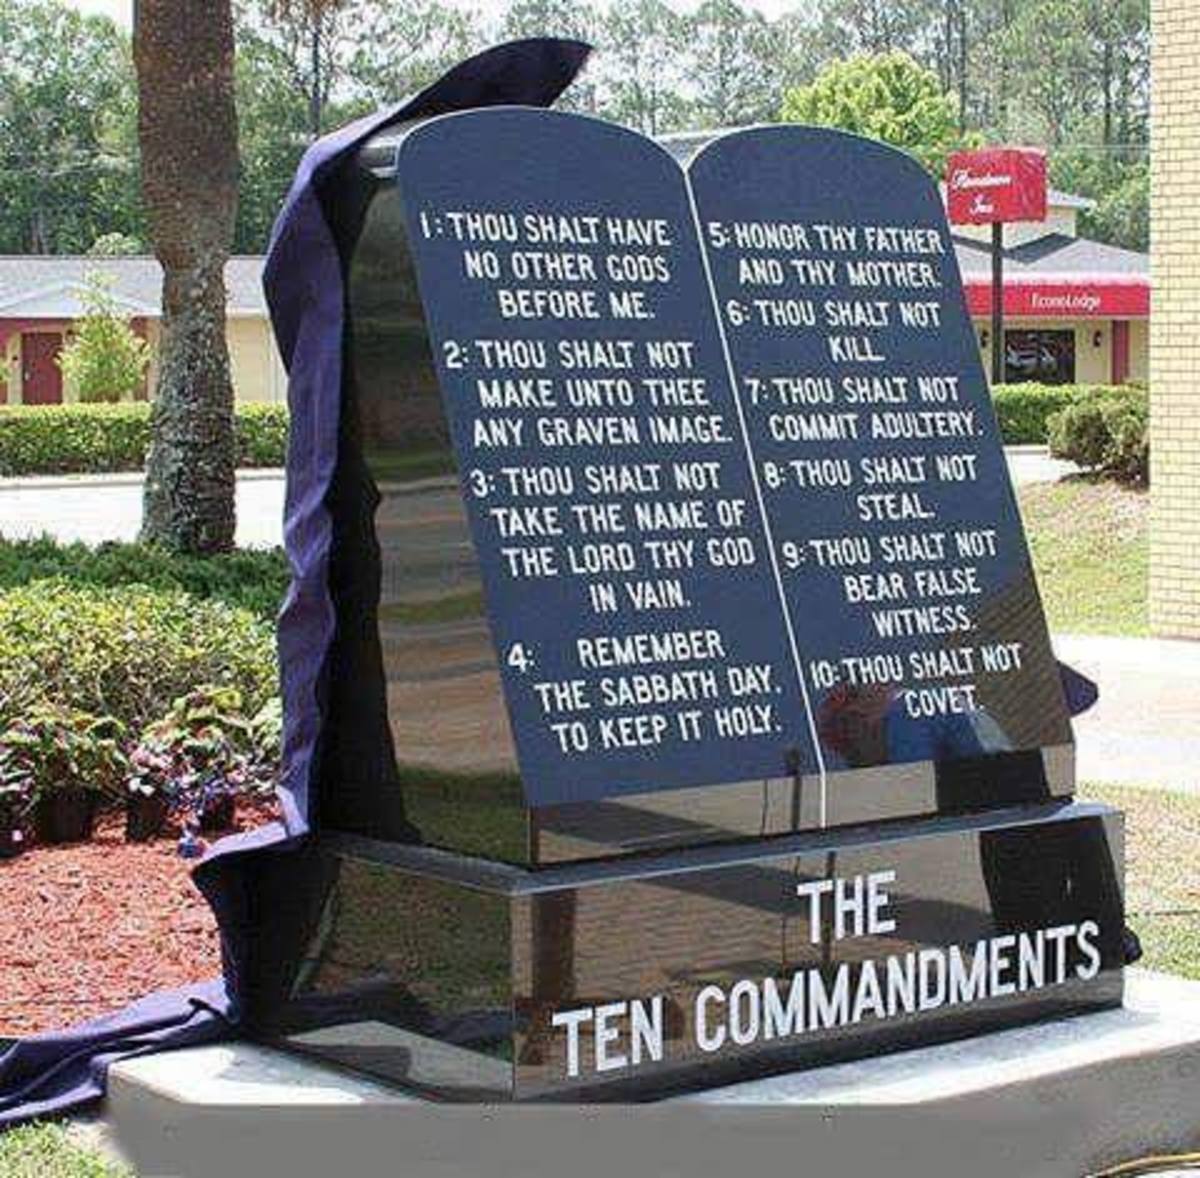 The 6 and 8th Commandments